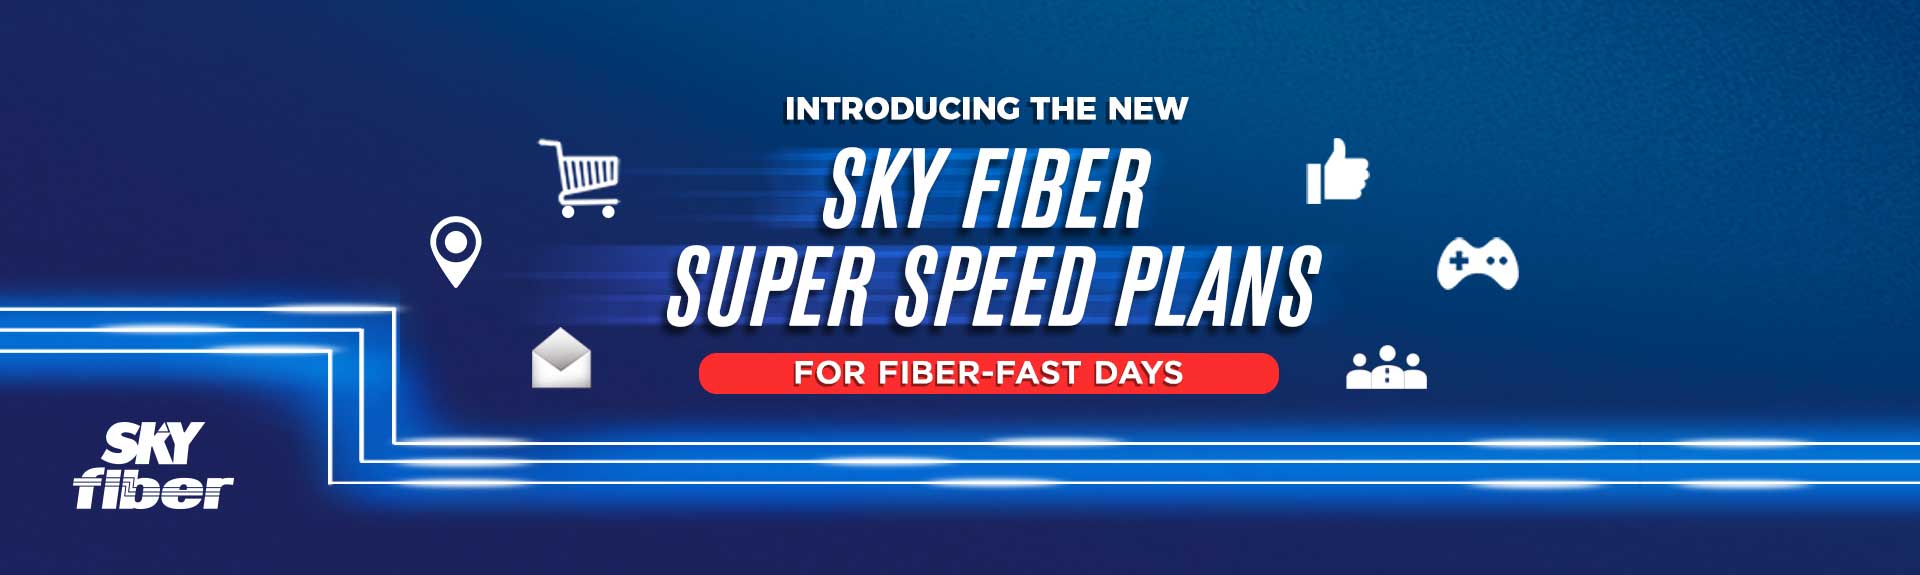 SKY Fiber launches new speed plans and the country's first all-in box